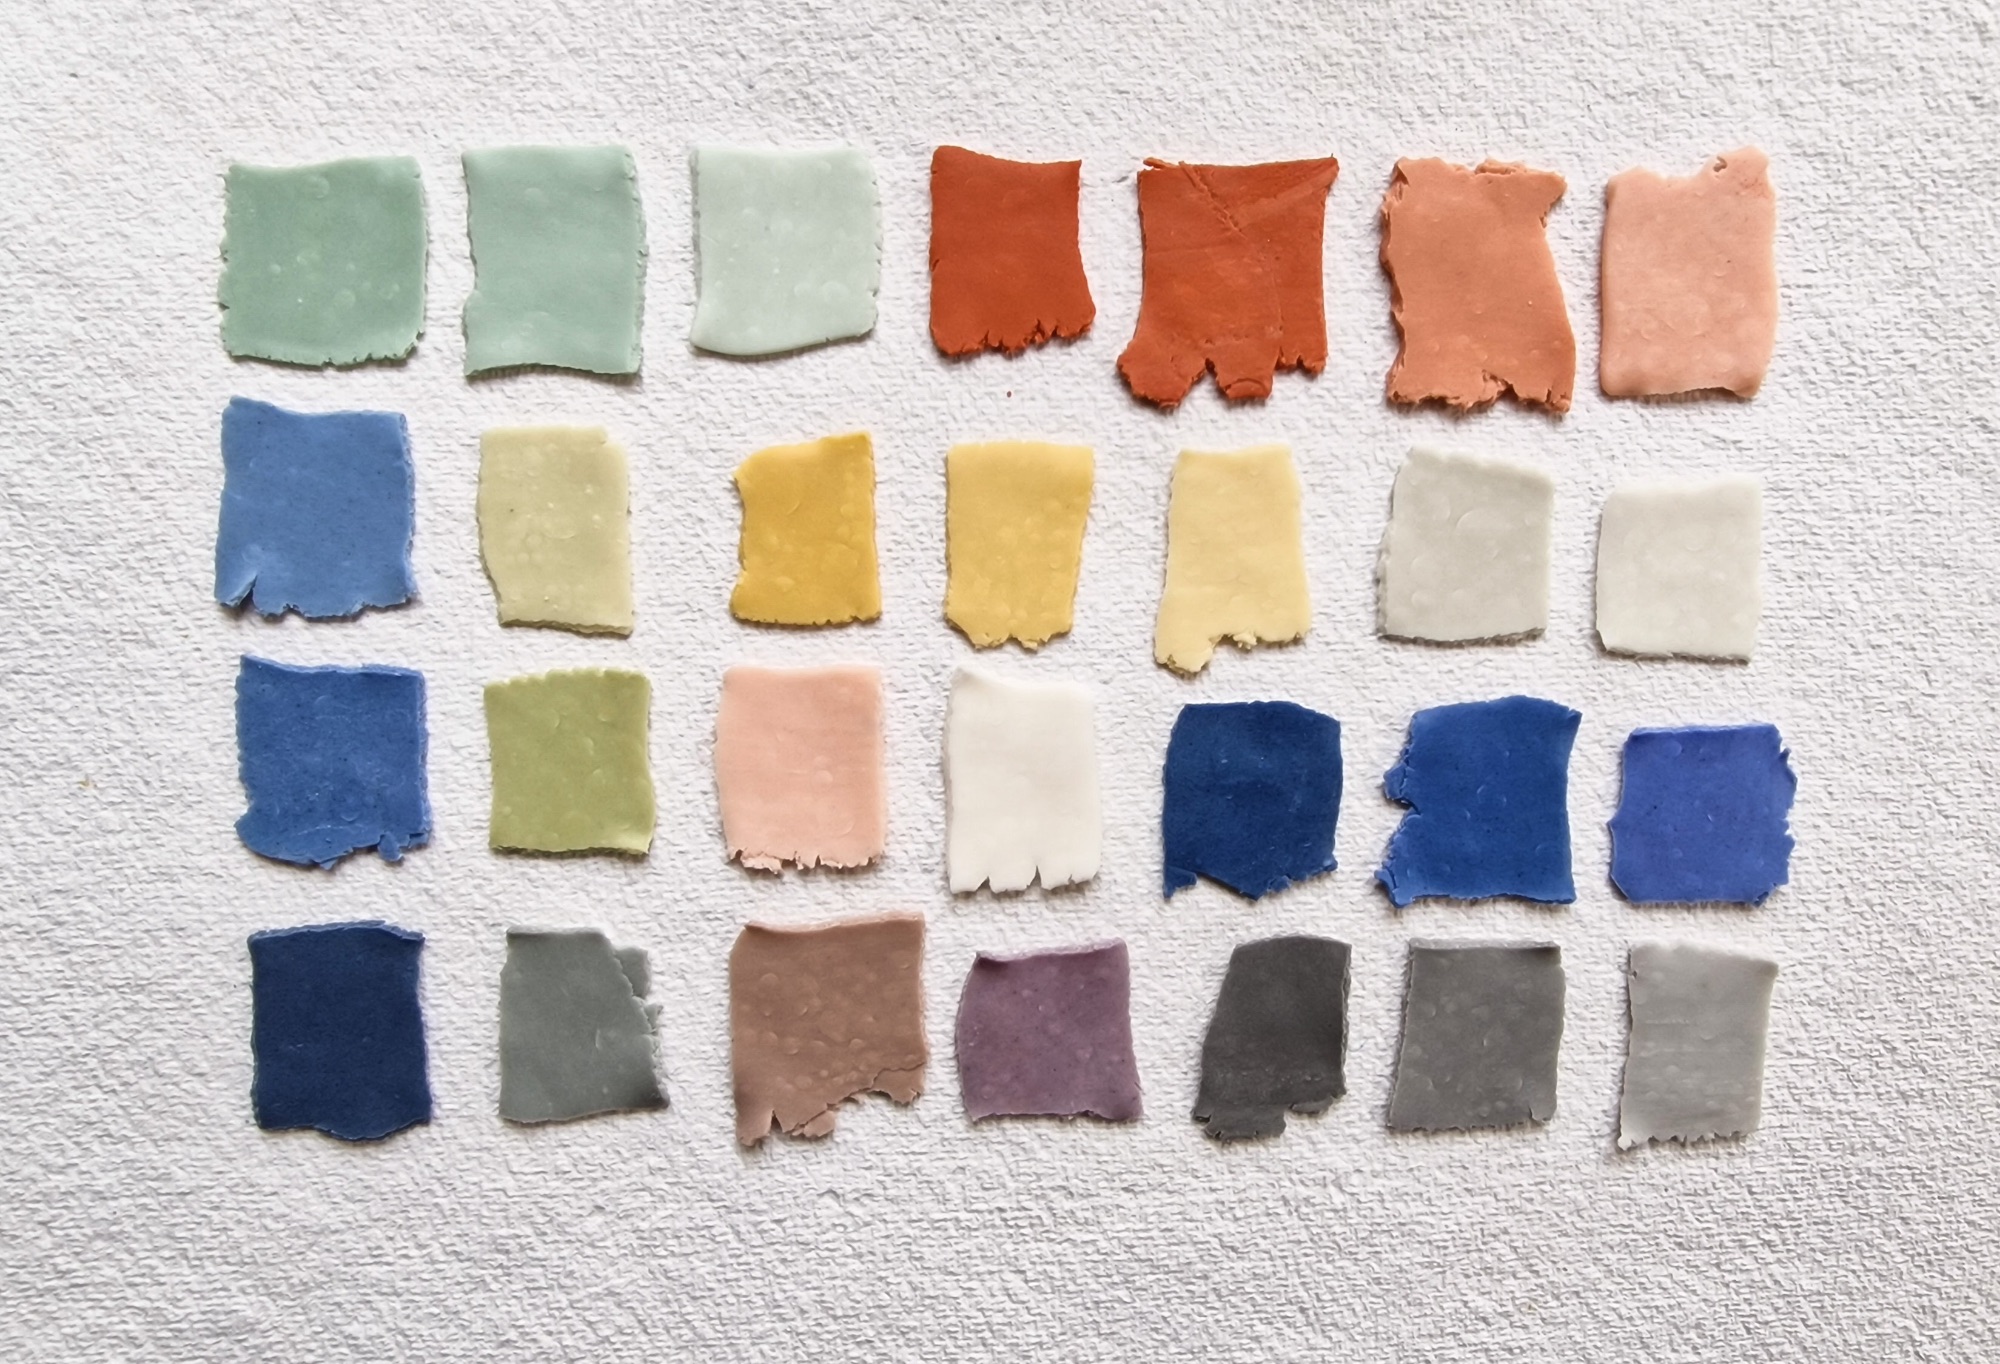 Sample polymer clay colour swatches